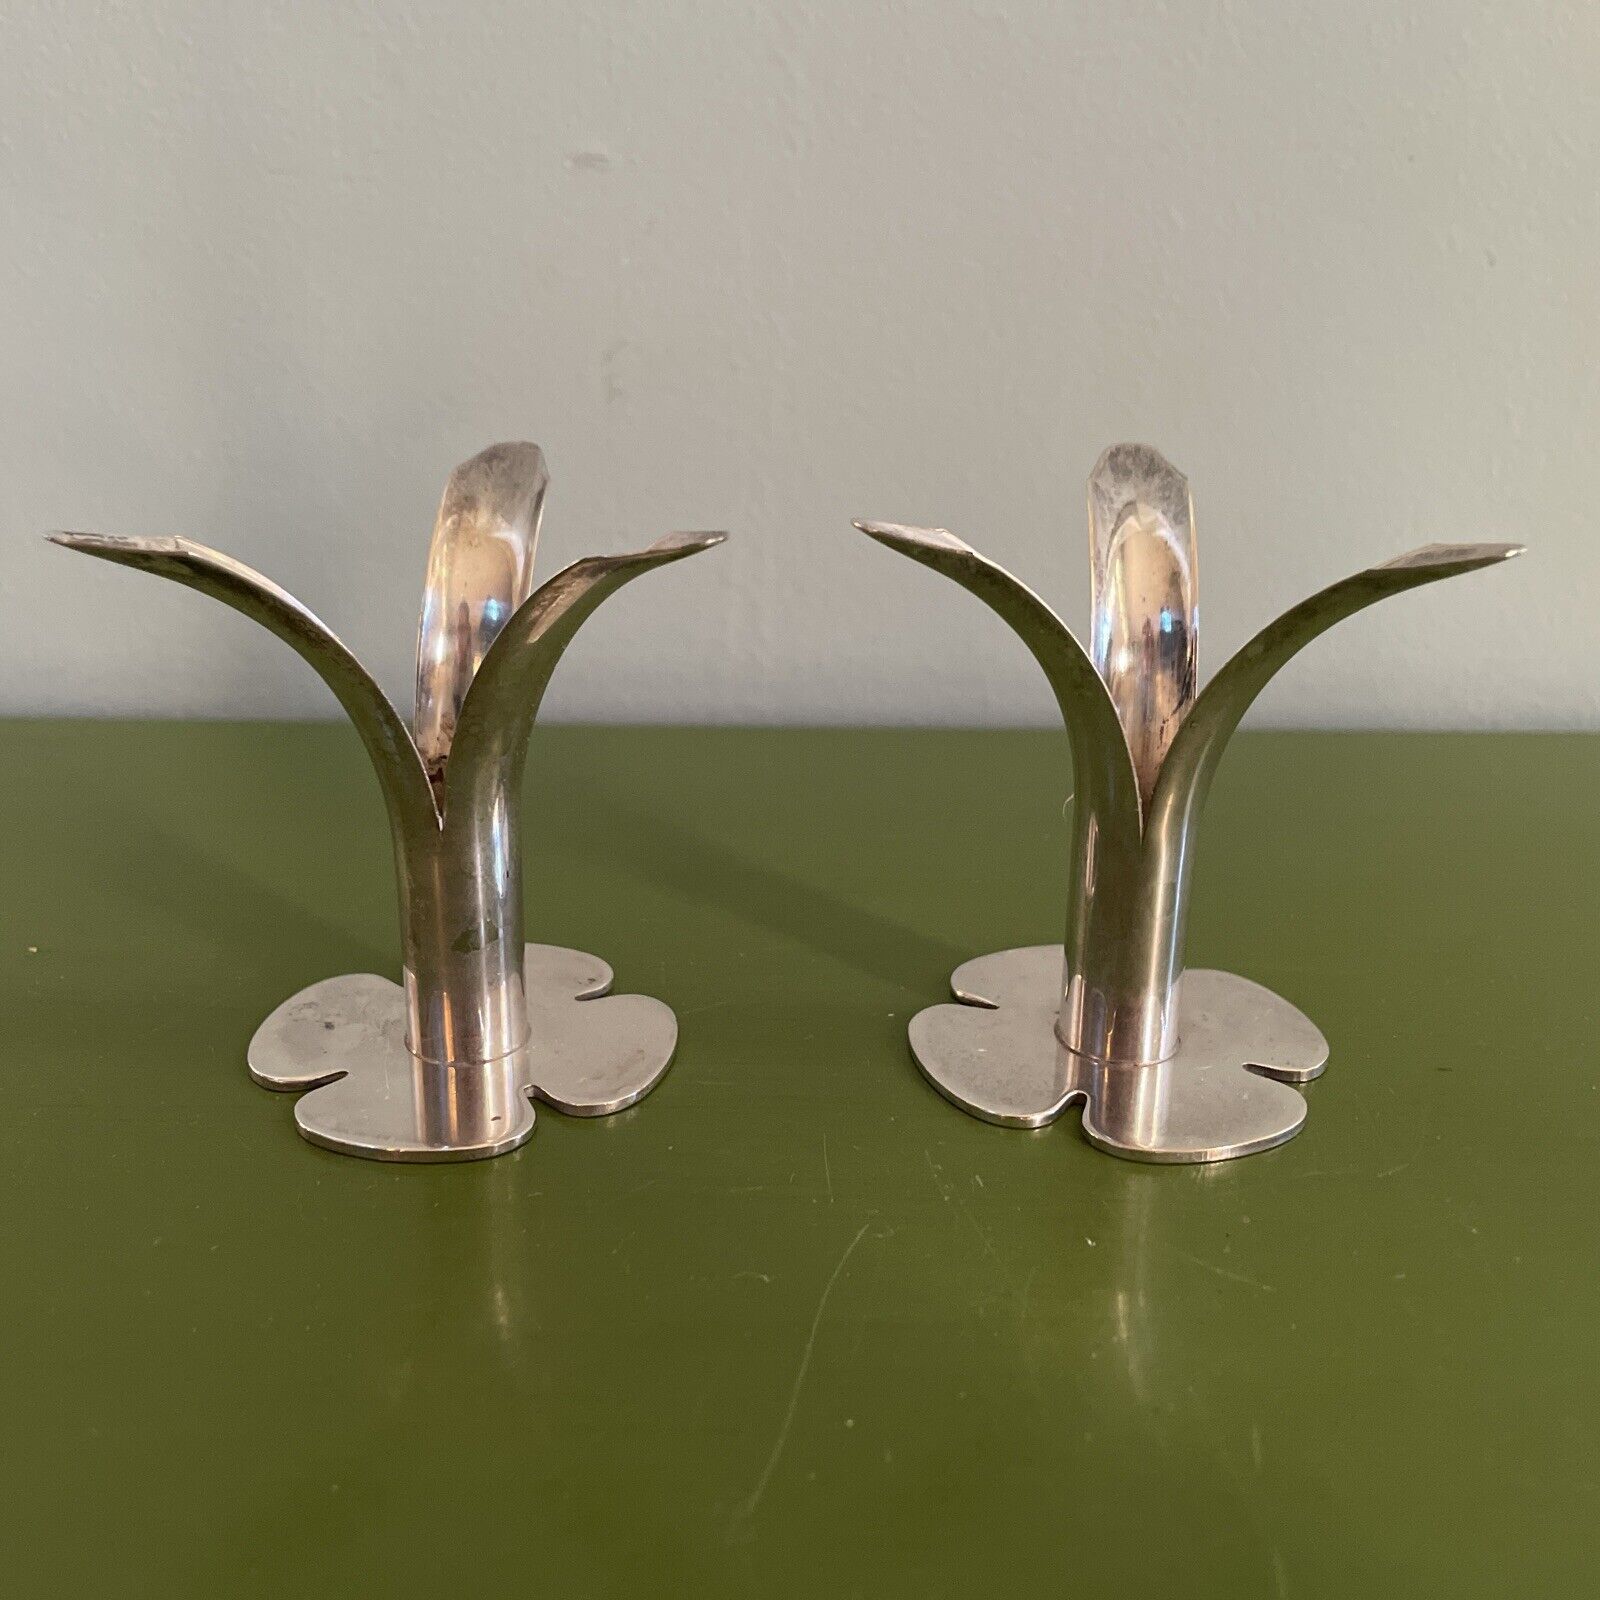 Set of 2 Vintage Norwegian Norway Silver Plate 3 Leaf Candle Holders 2-3/8” Tall